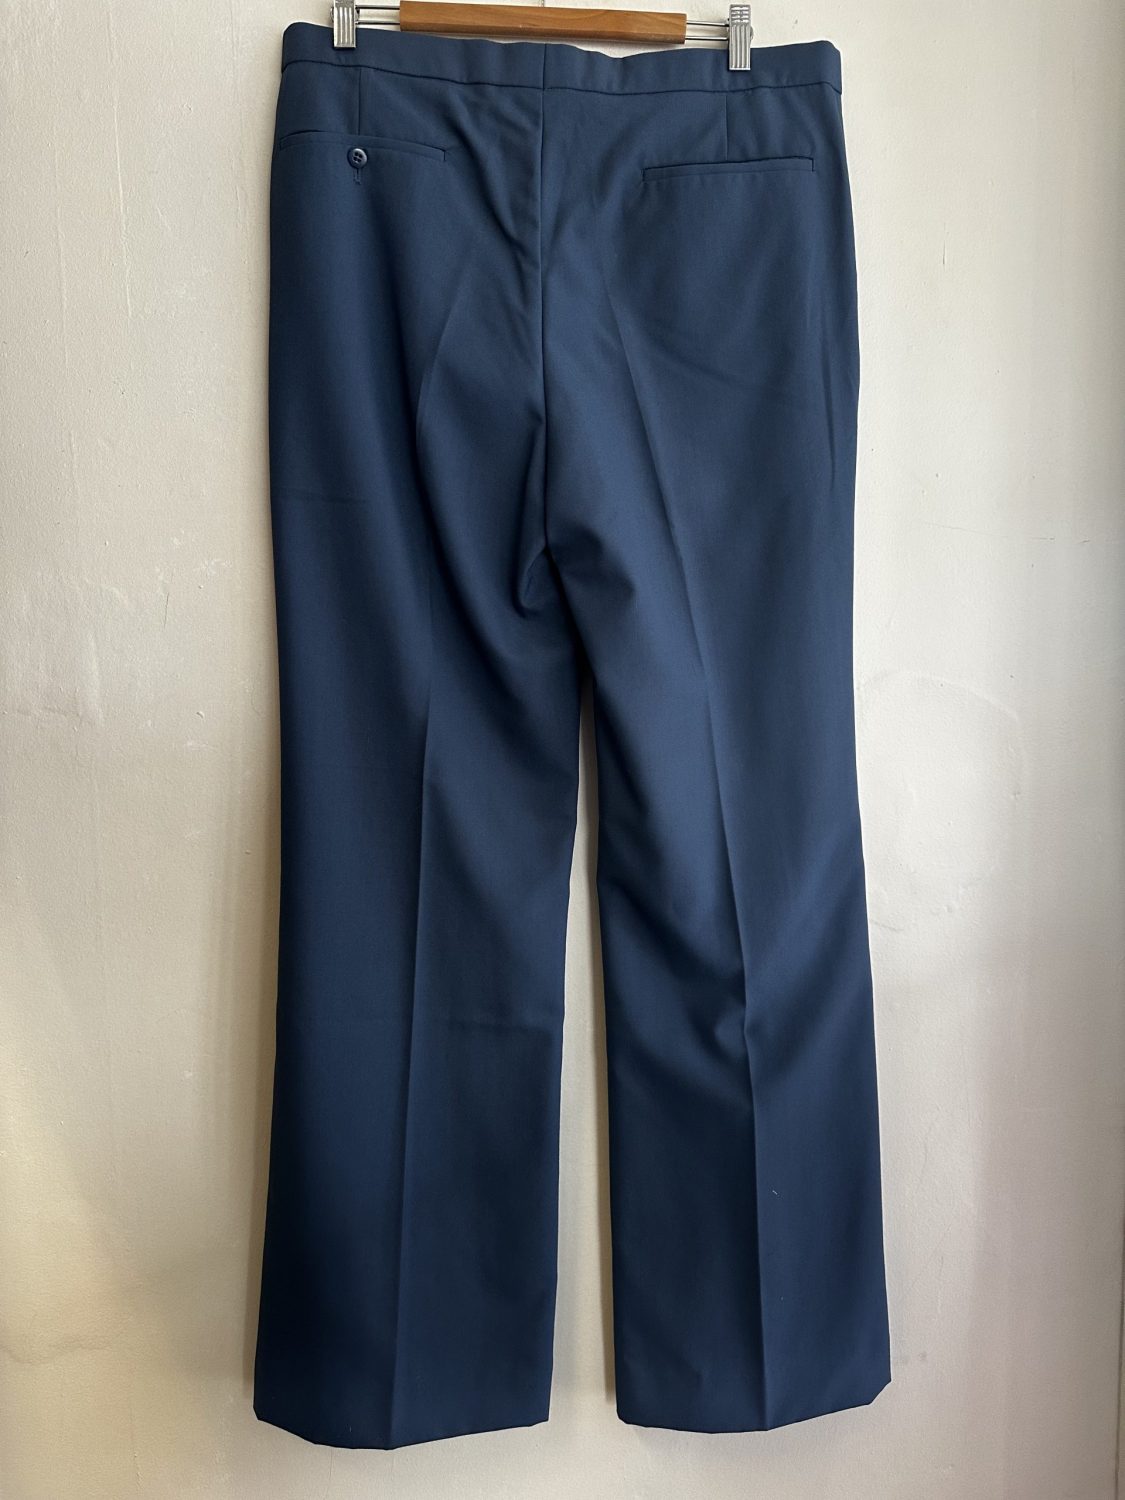 VINTAGE DEADSTOCK 70s 'MANN' BLUE FLARED MENS PANTS 34 INCH | Chaos ...